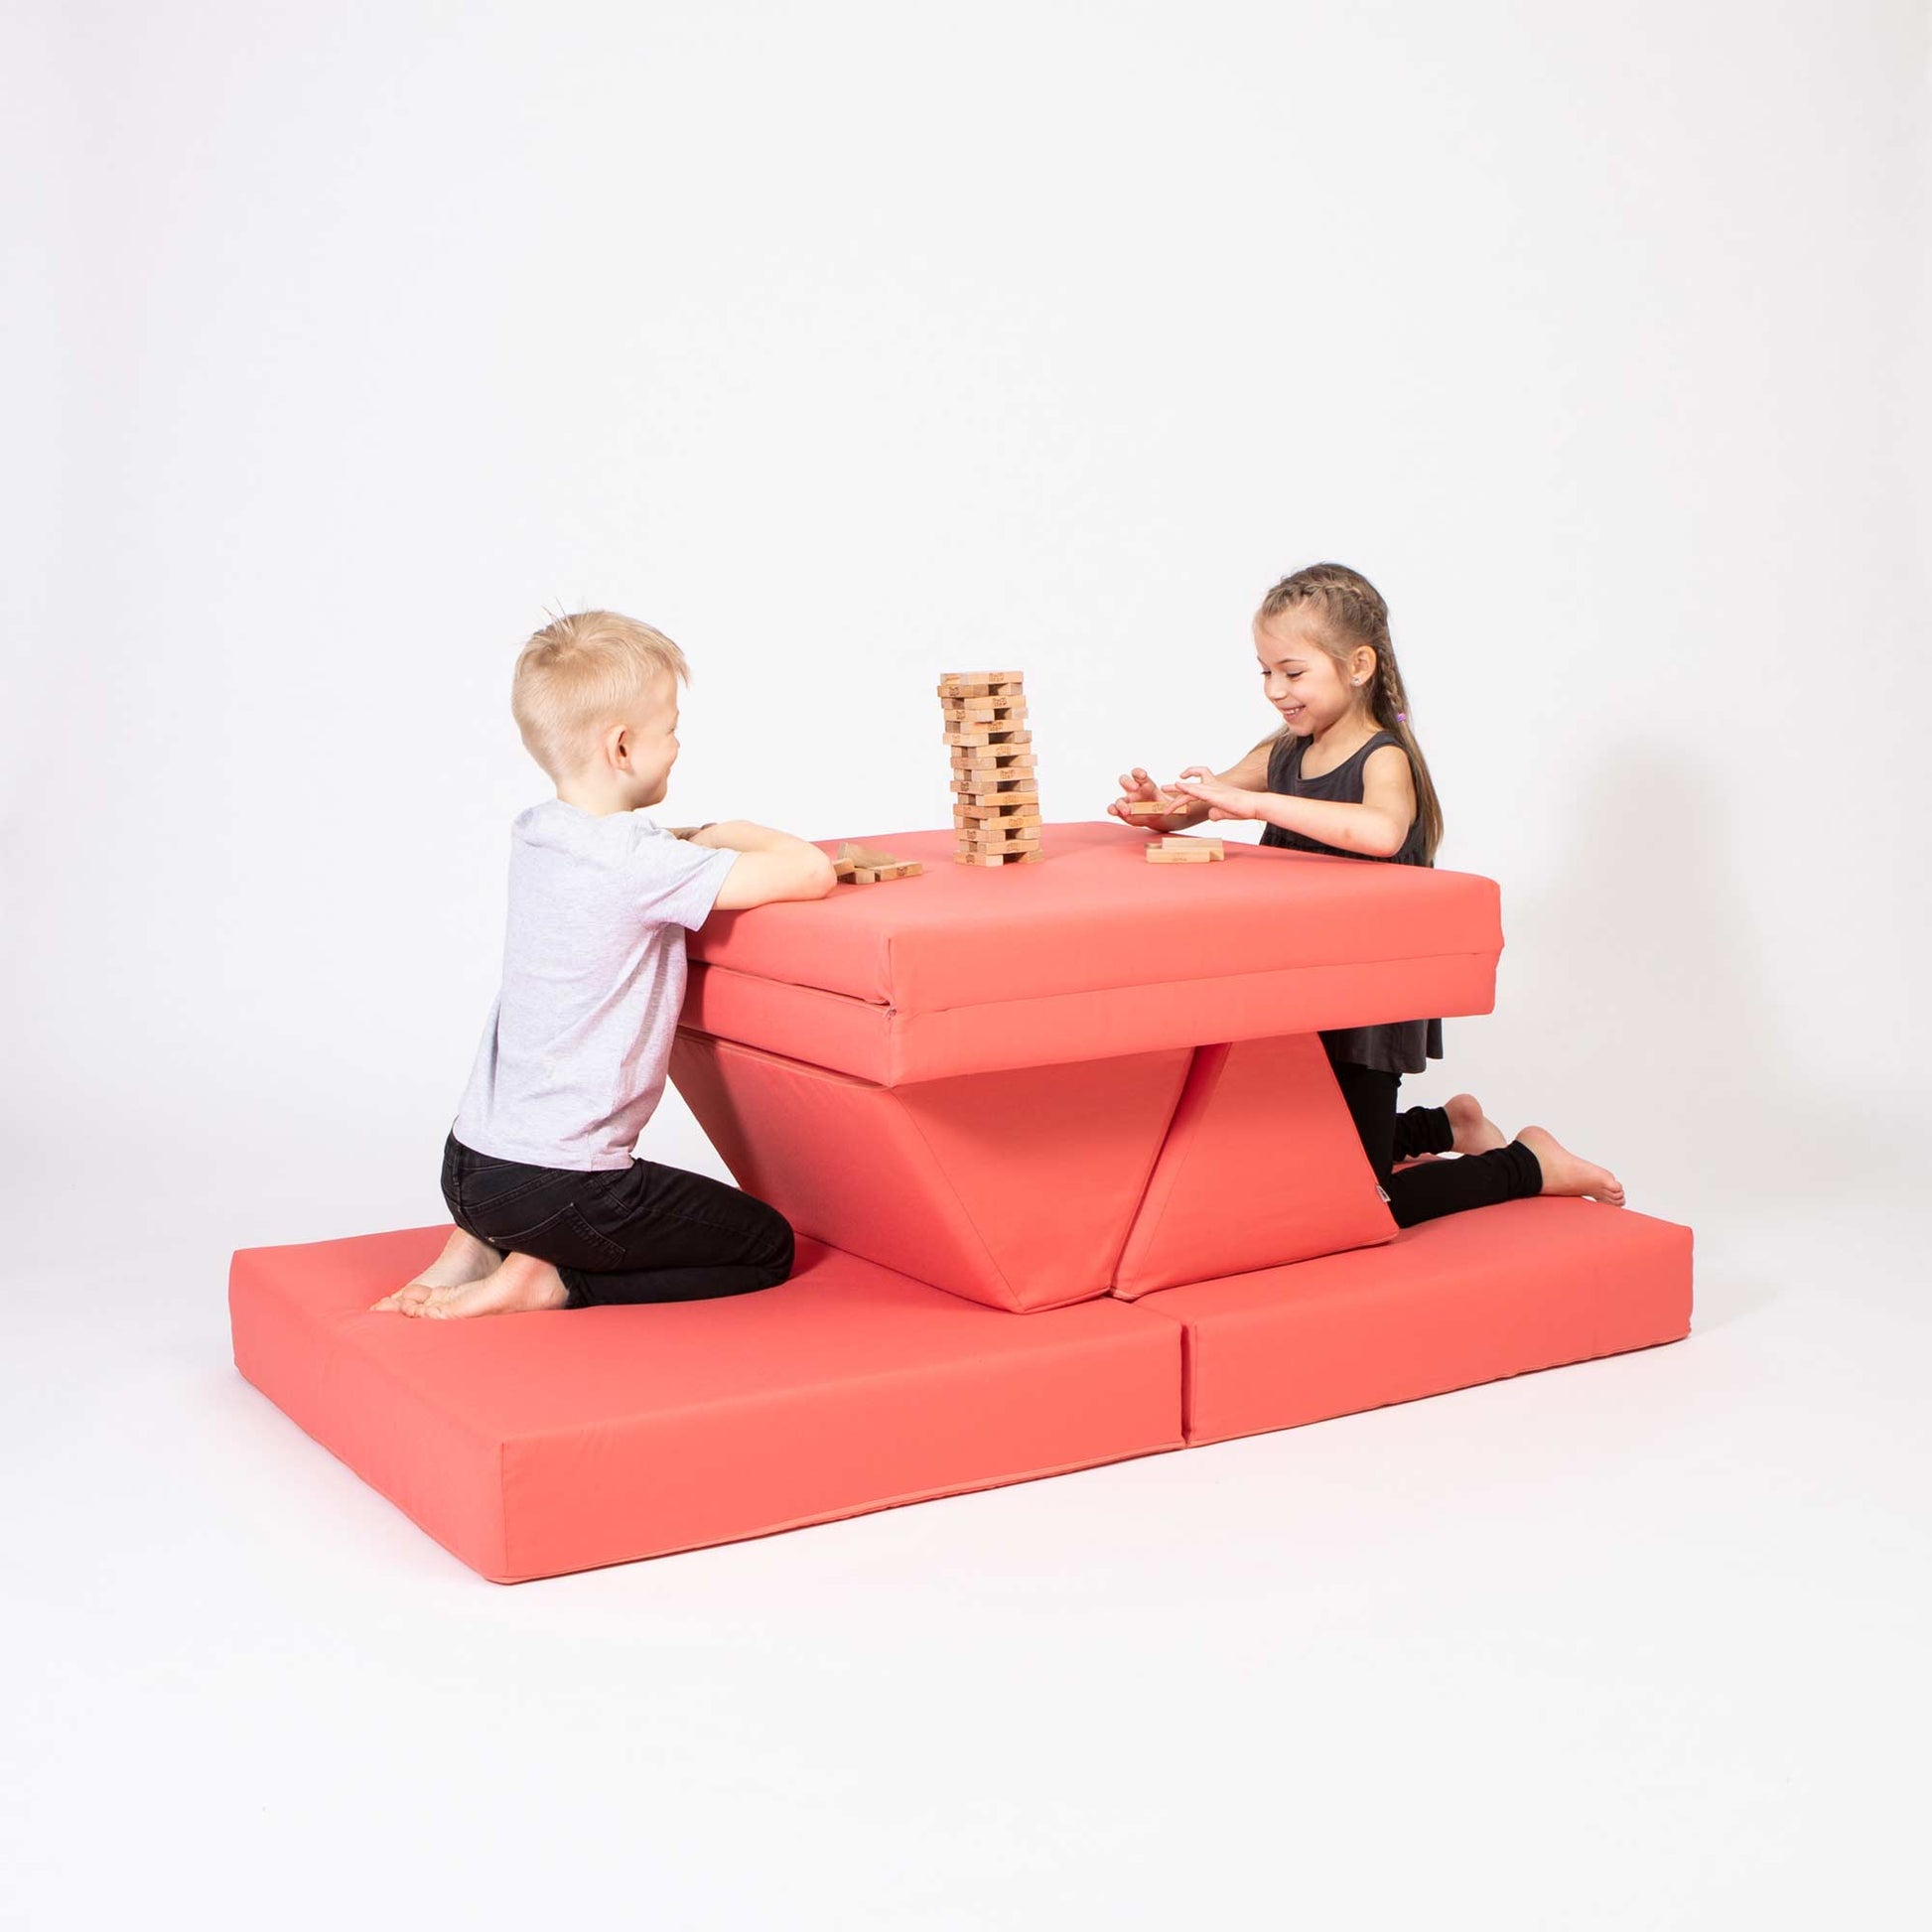 A boy and a girl playing jenga on their coral Monboxy foam playset